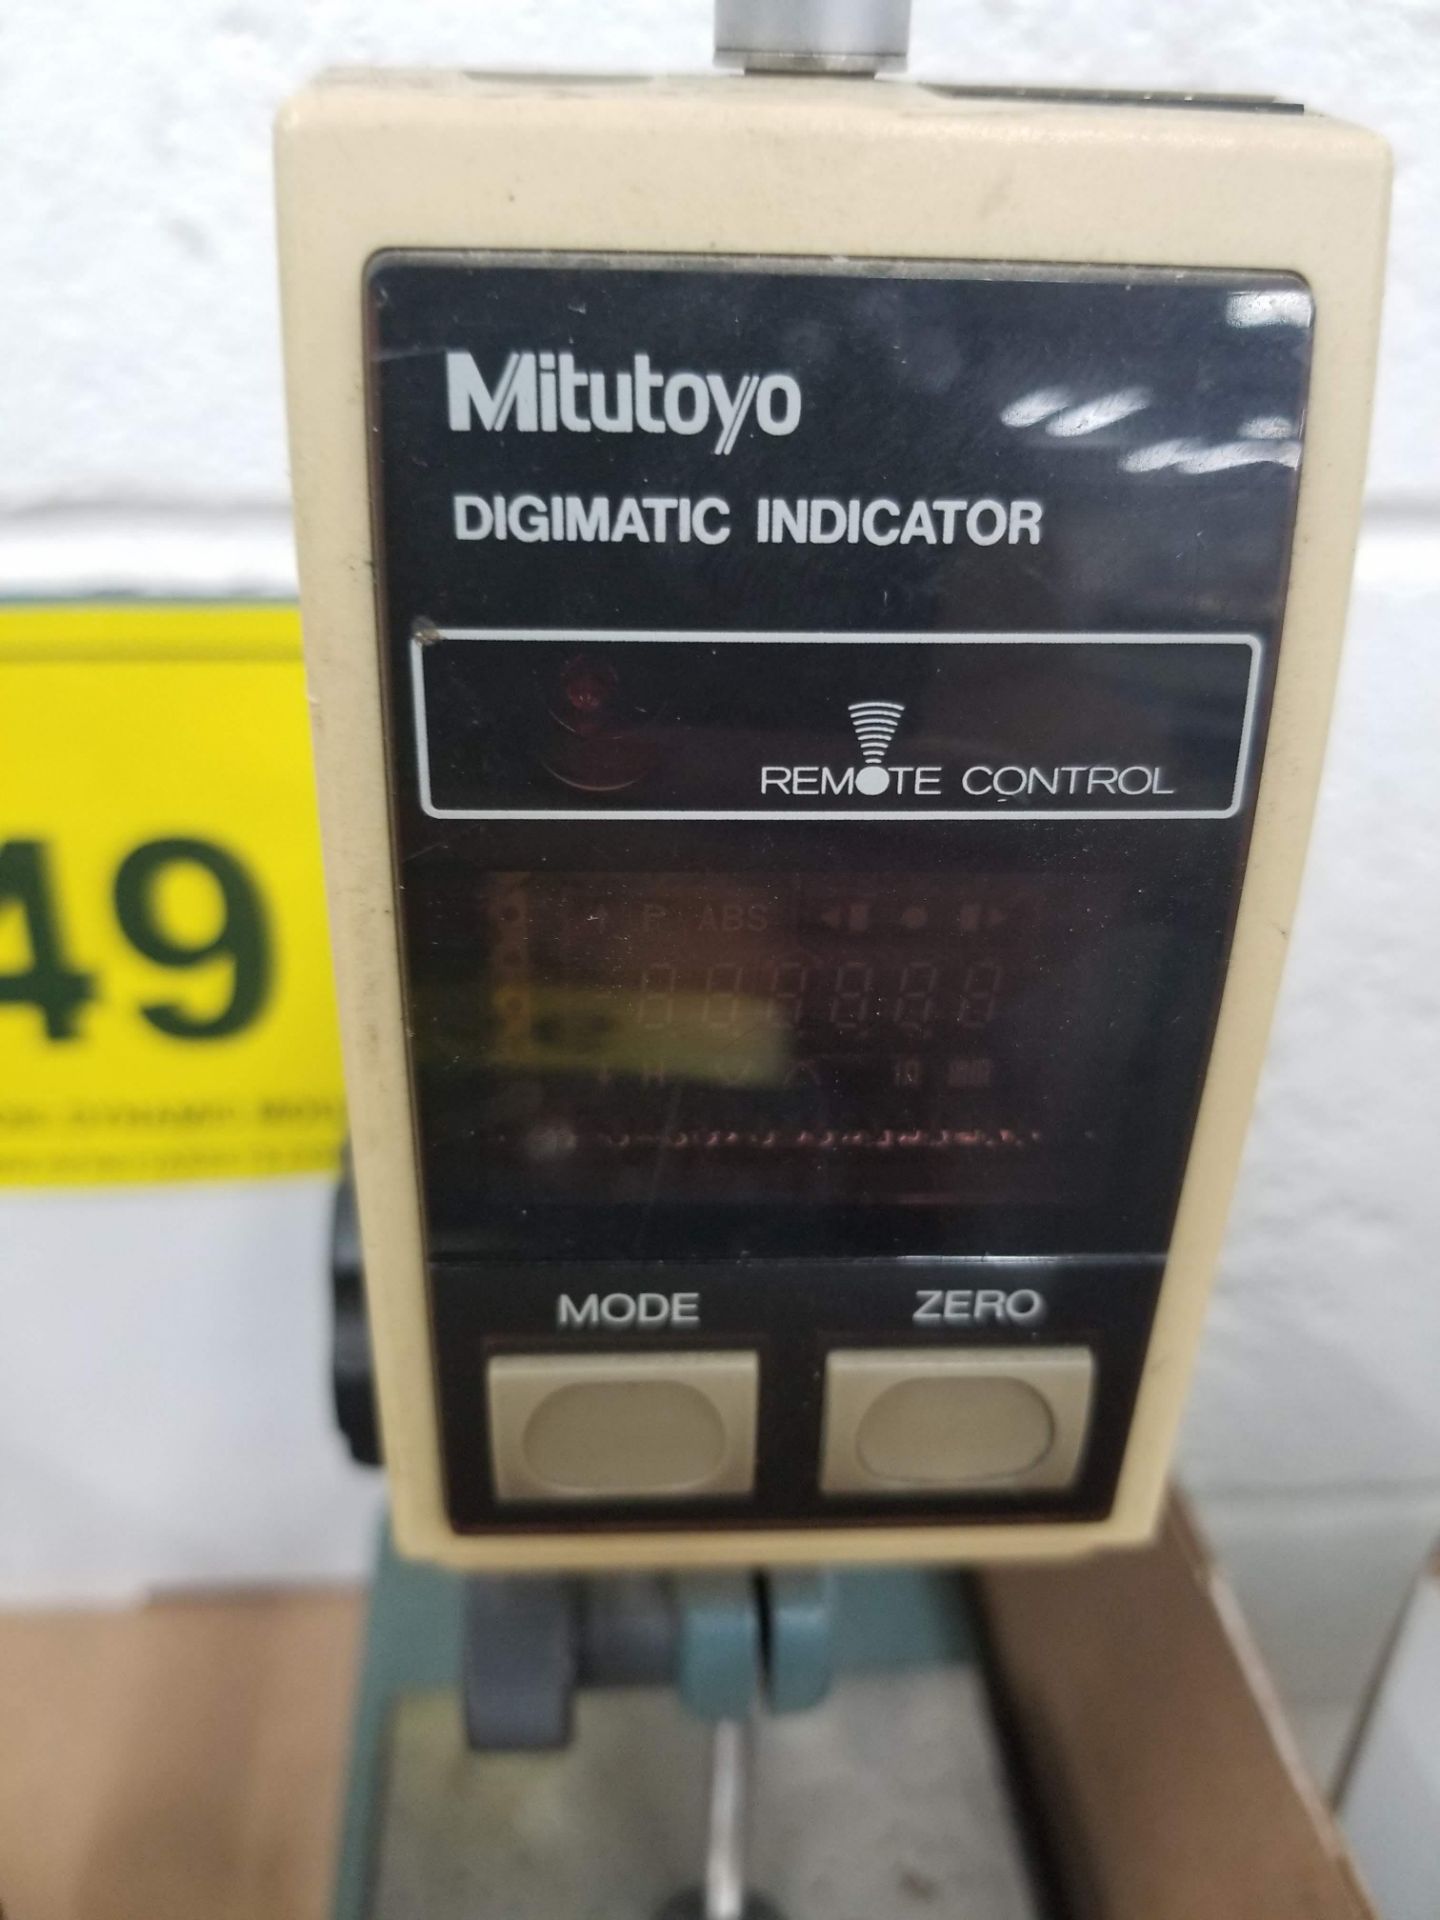 LOT - MITUTOYO PRECISION MICROMETER W/ ELECTRONIC QUALITY CONTROL GAUGE - Image 2 of 3